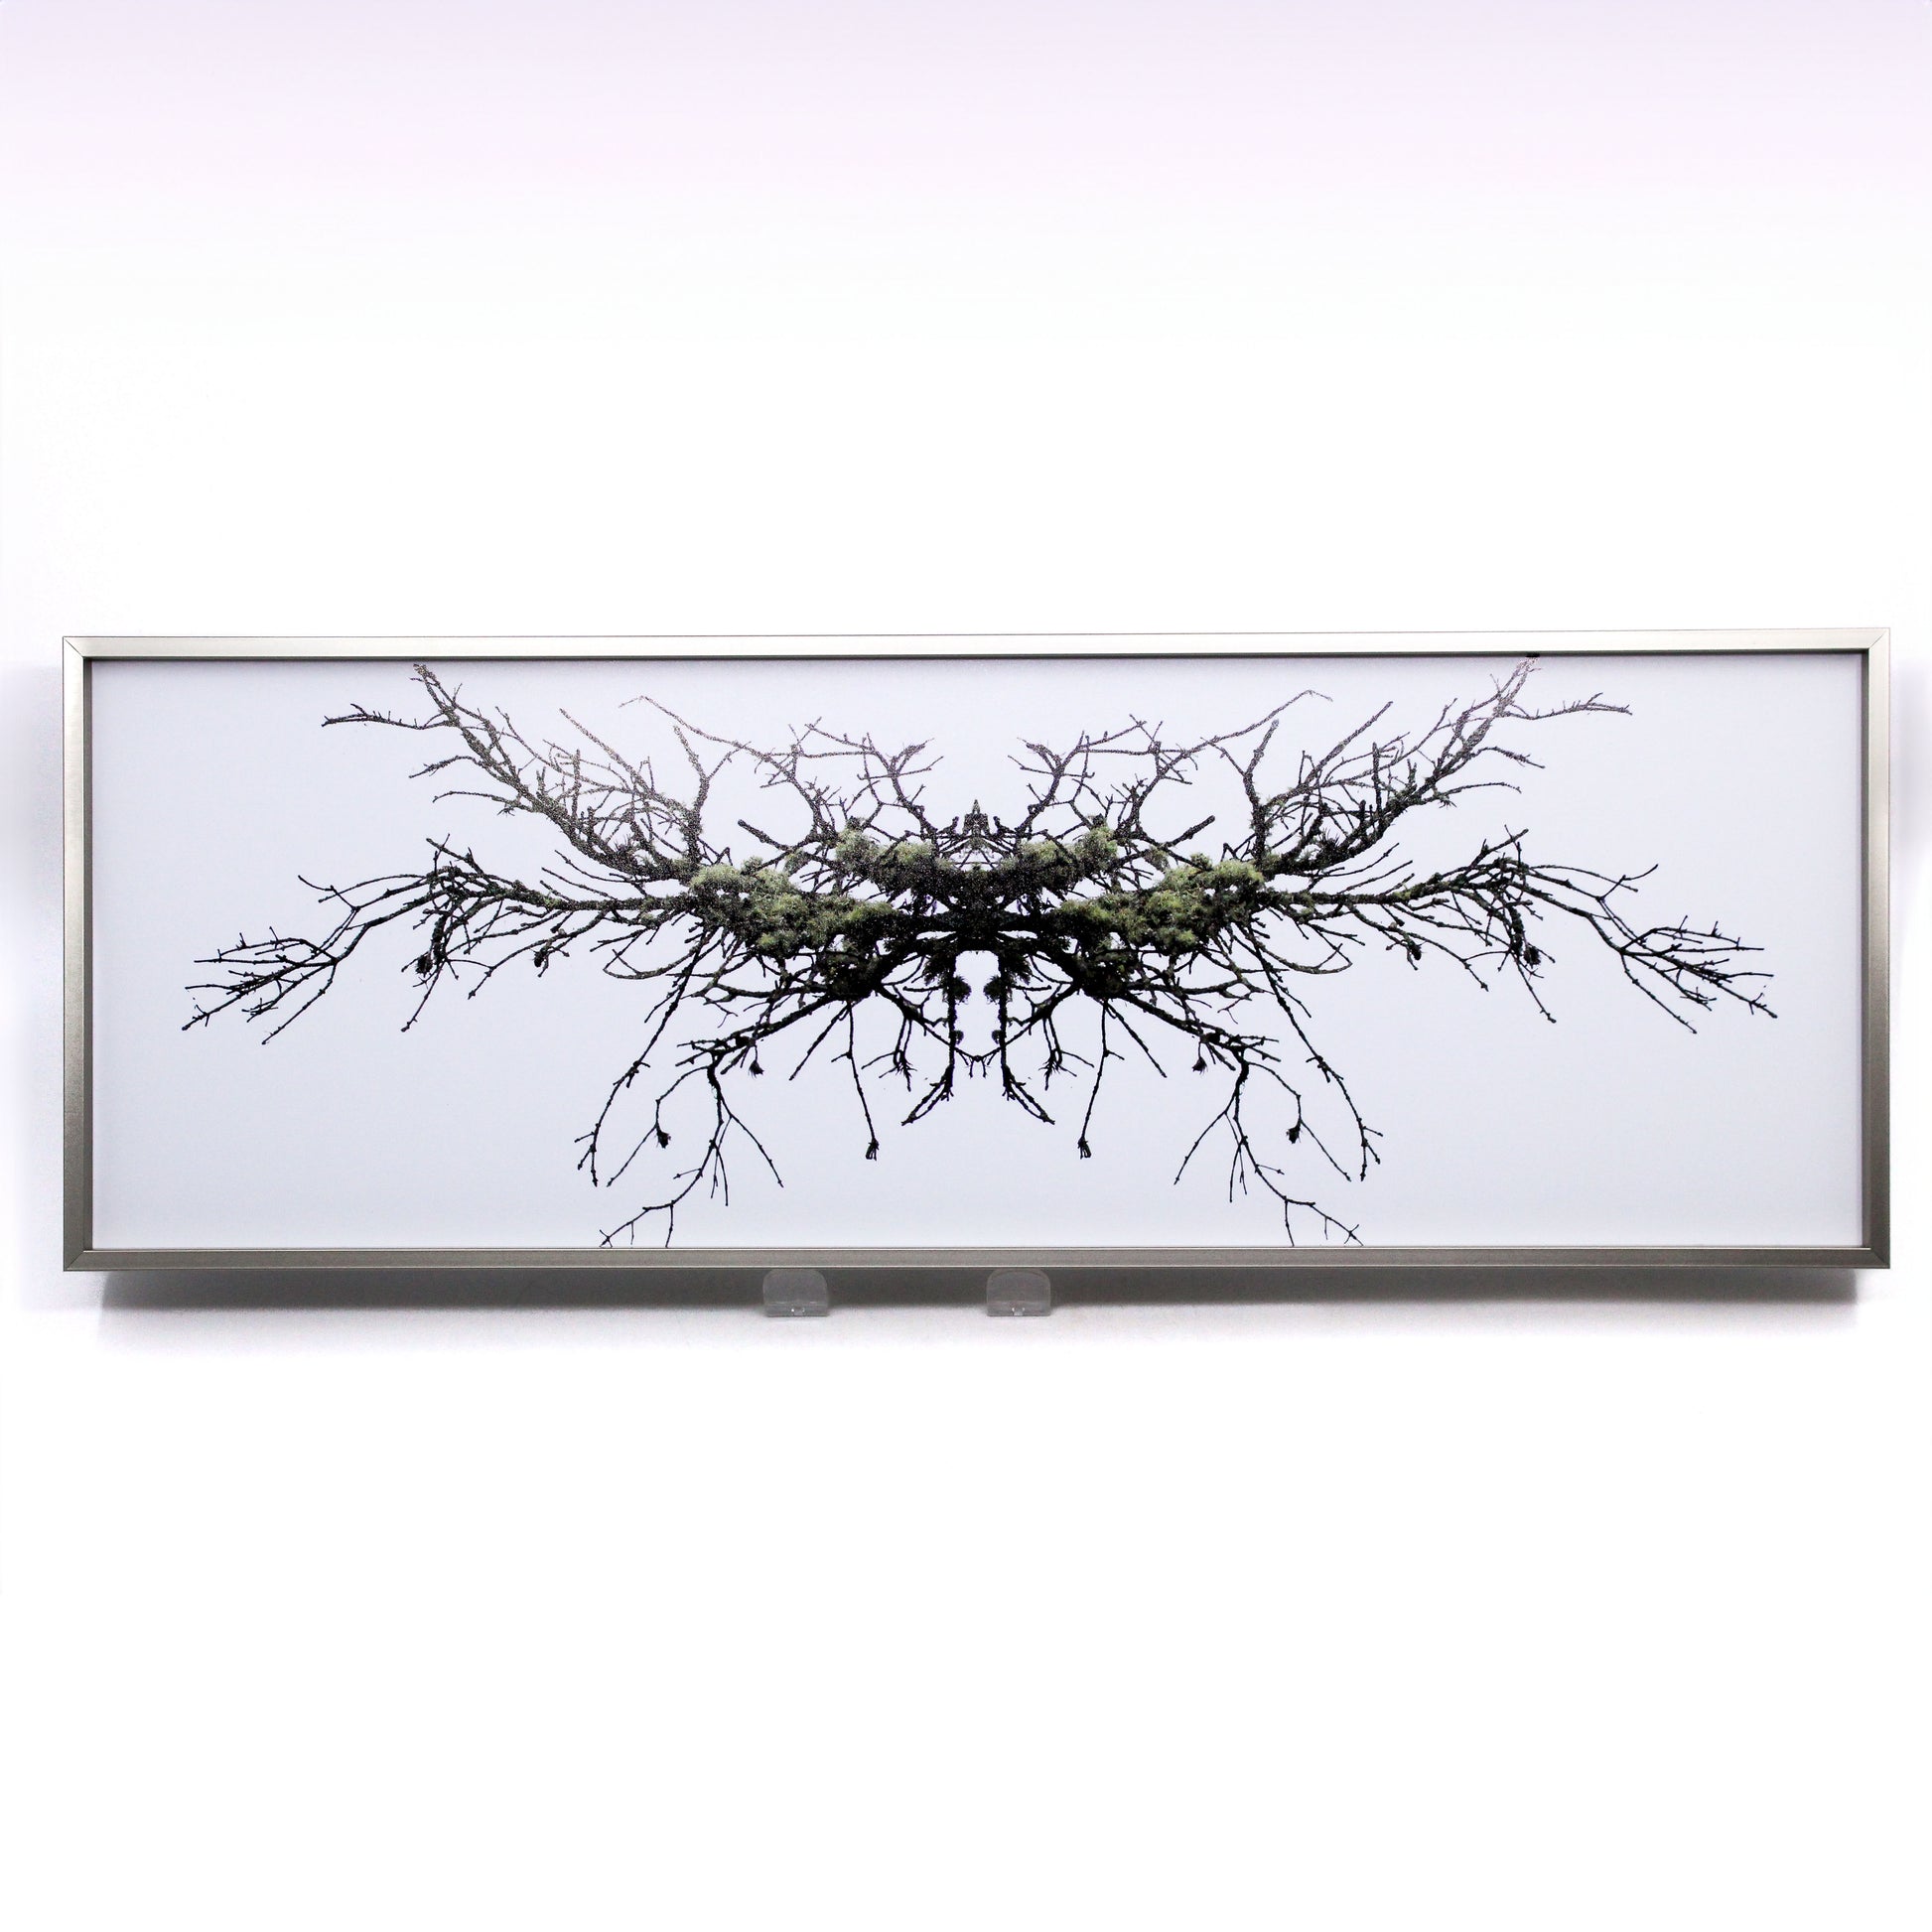 Framed photograph of abstract tree branches